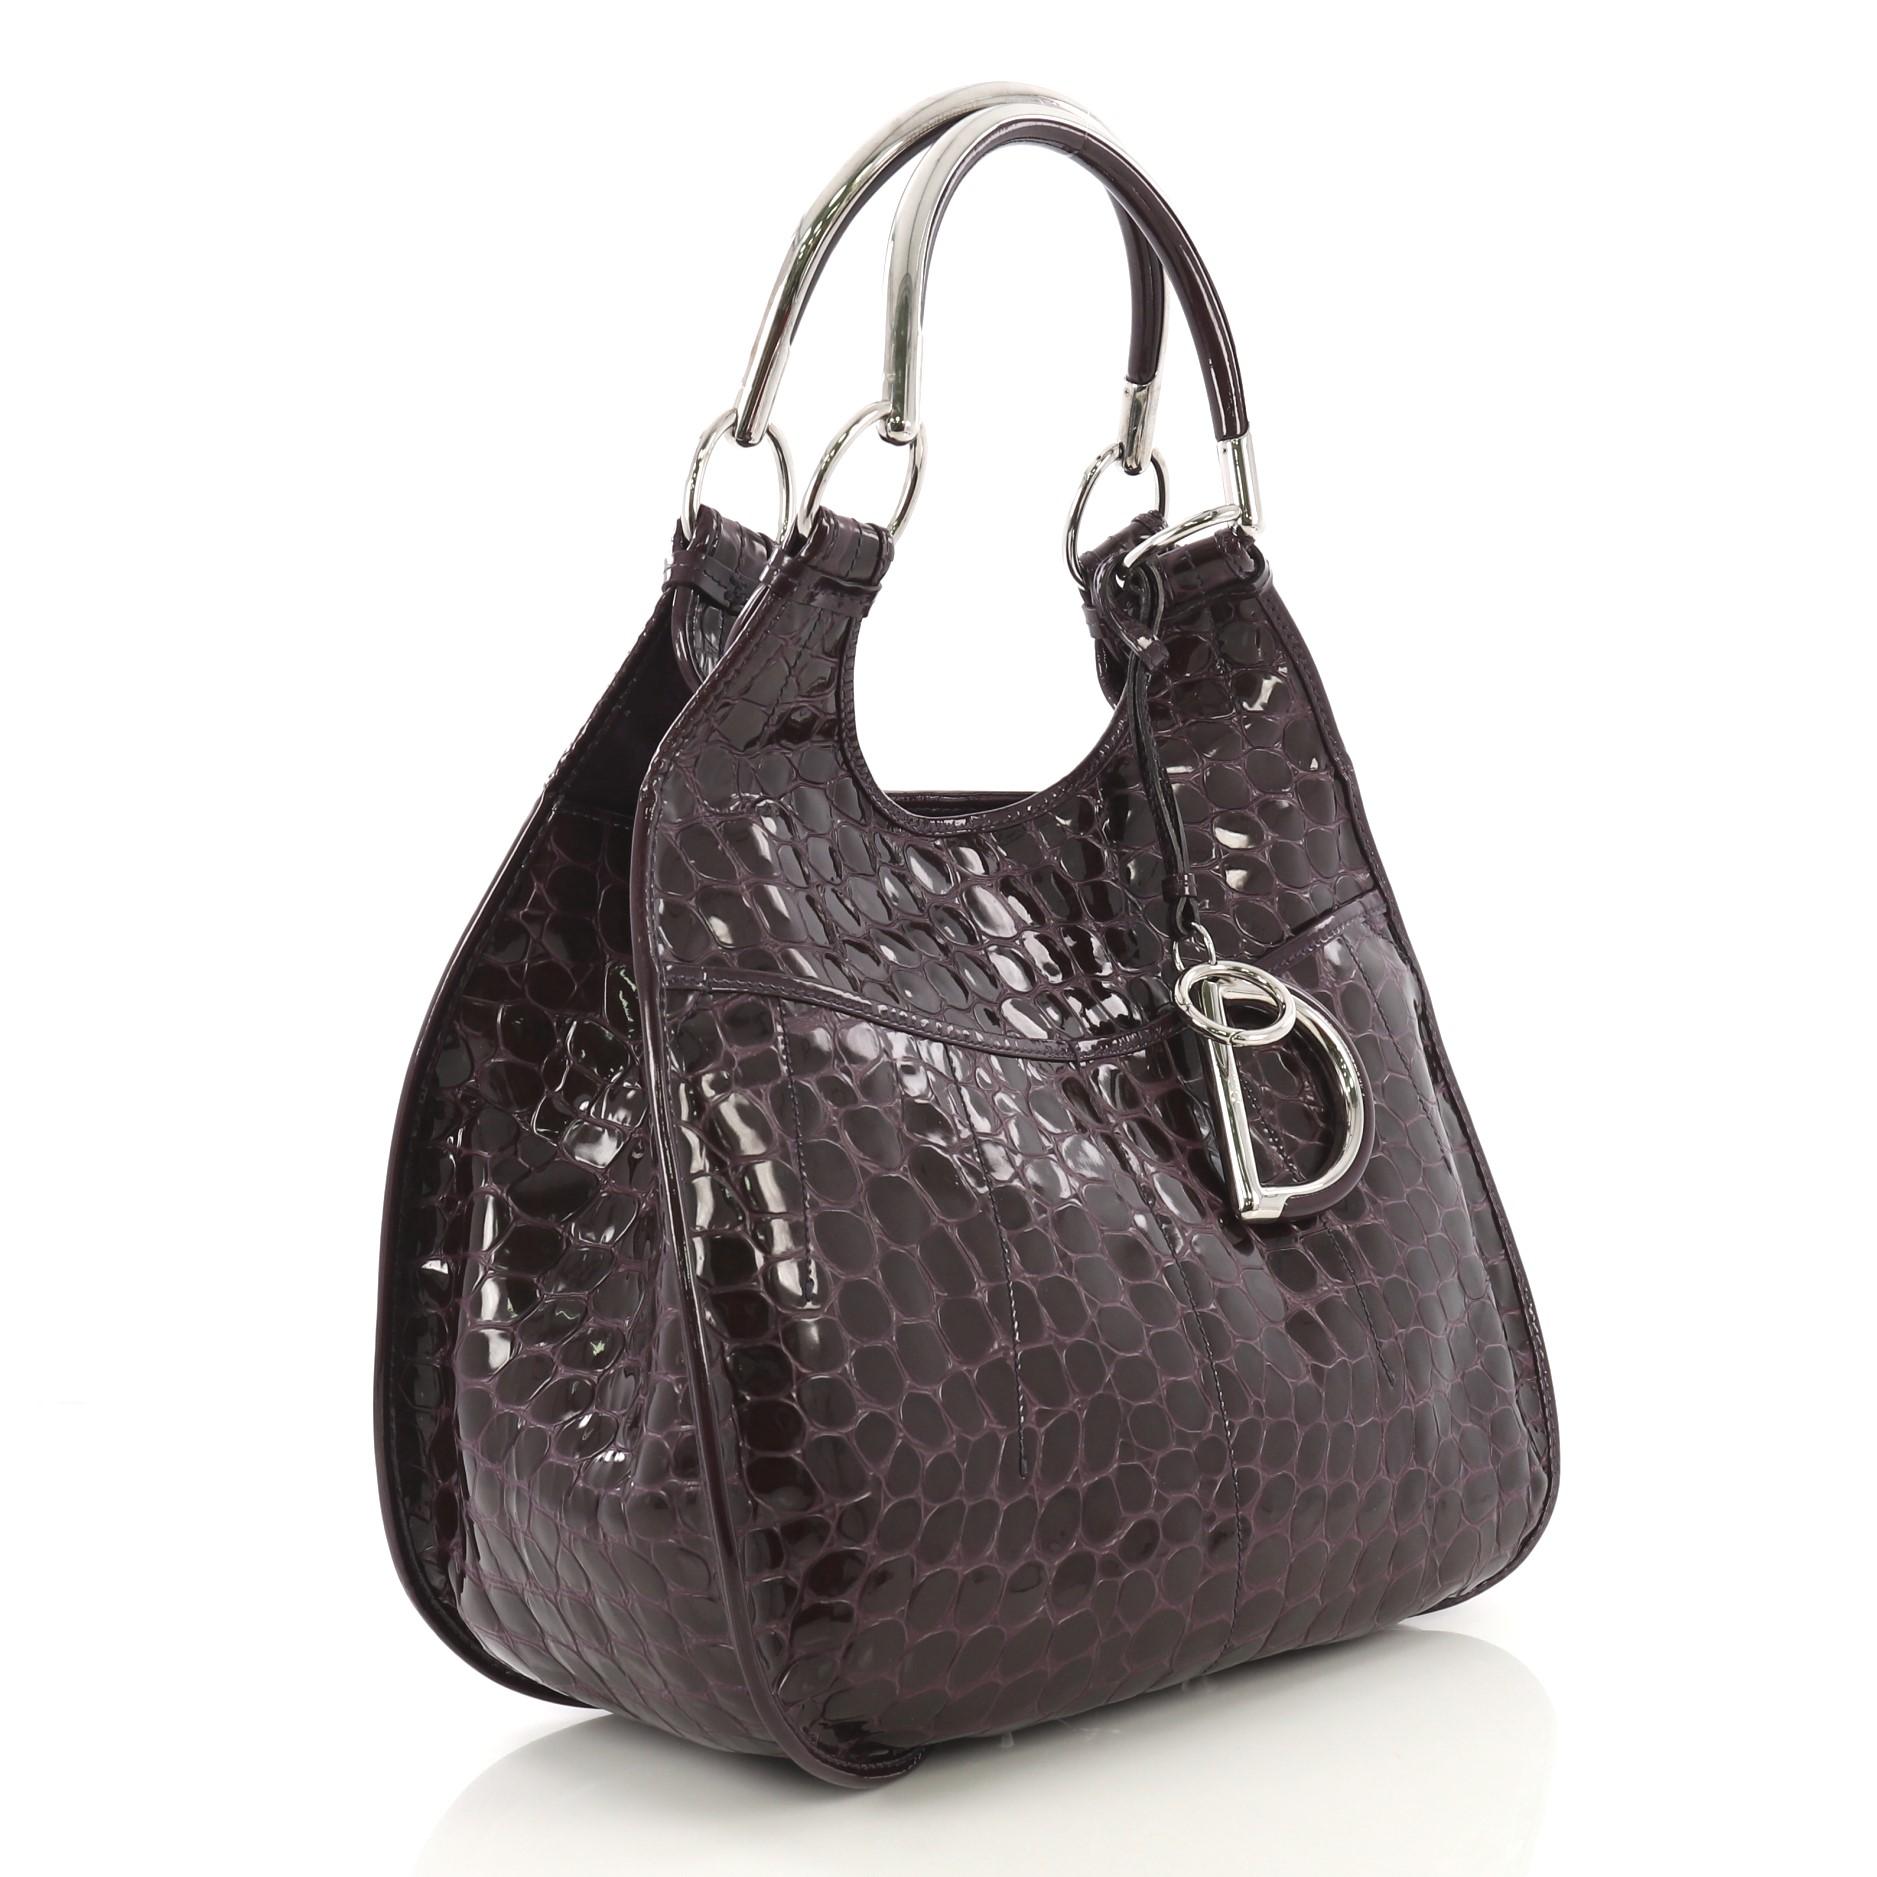 This Christian Dior 61 Shoulder Bag Crocodile Embossed Patent Medium, crafted in purple crocodile embossed patent leather, features dual metal handles, exterior front slip pockets, Dior charms, protective based studs and silver-tone hardware. It